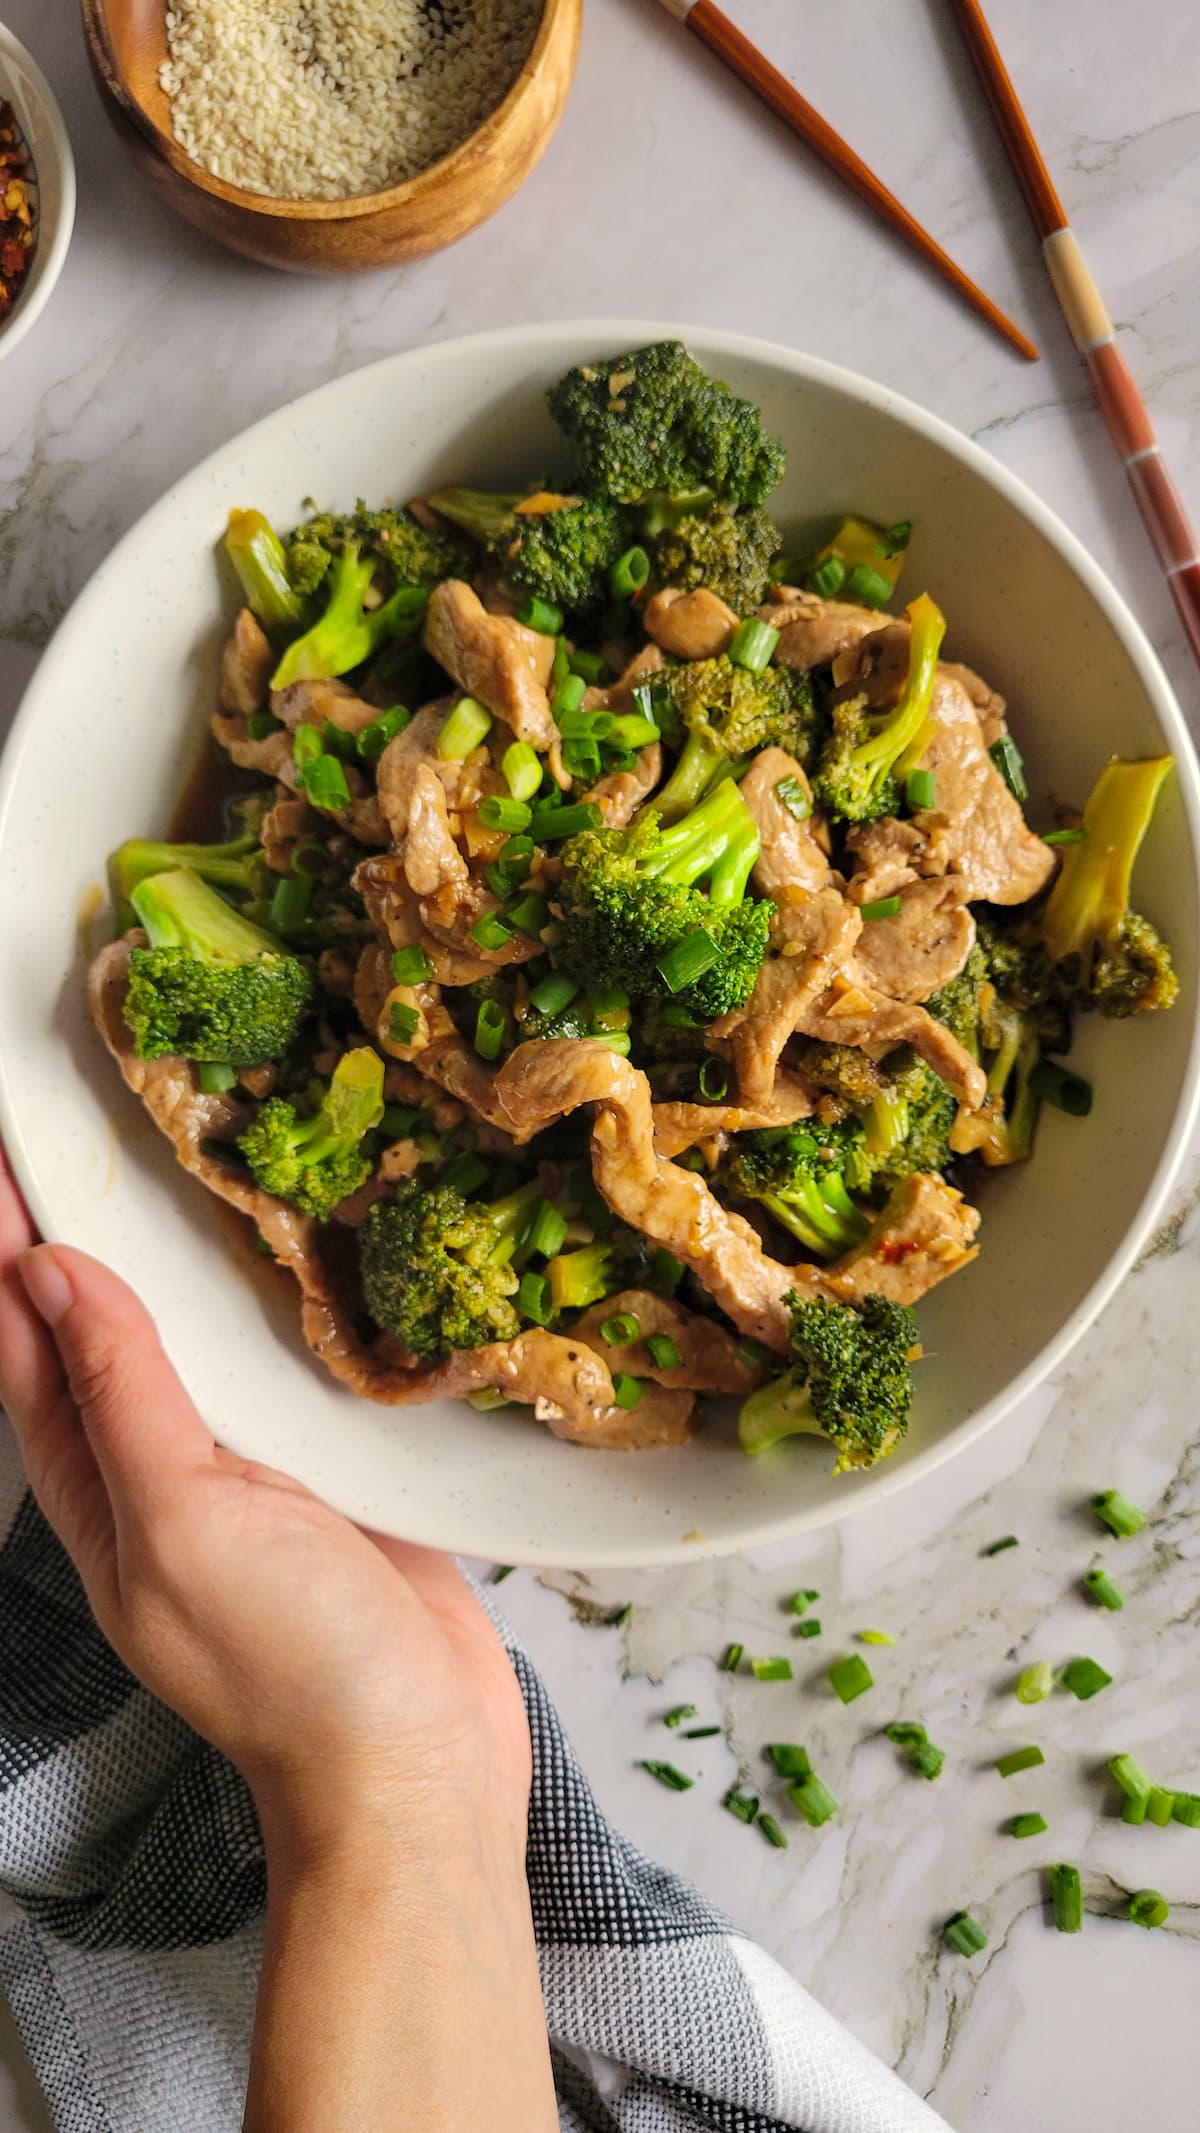 hand holding a bowl of stir fried broccoli and pork garnished with green onions